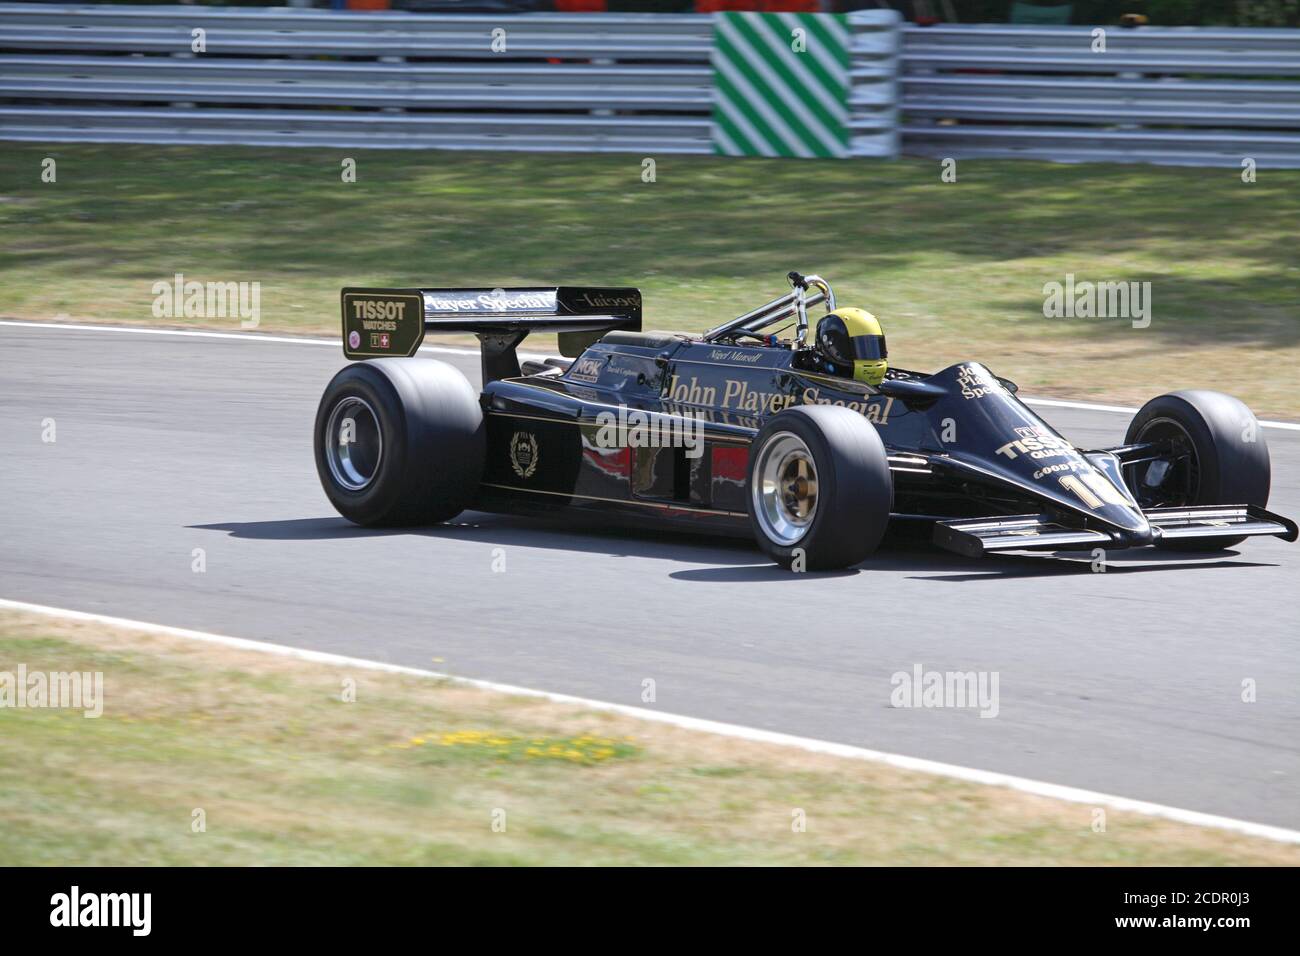 John Player Special Lotus Banque D'Images